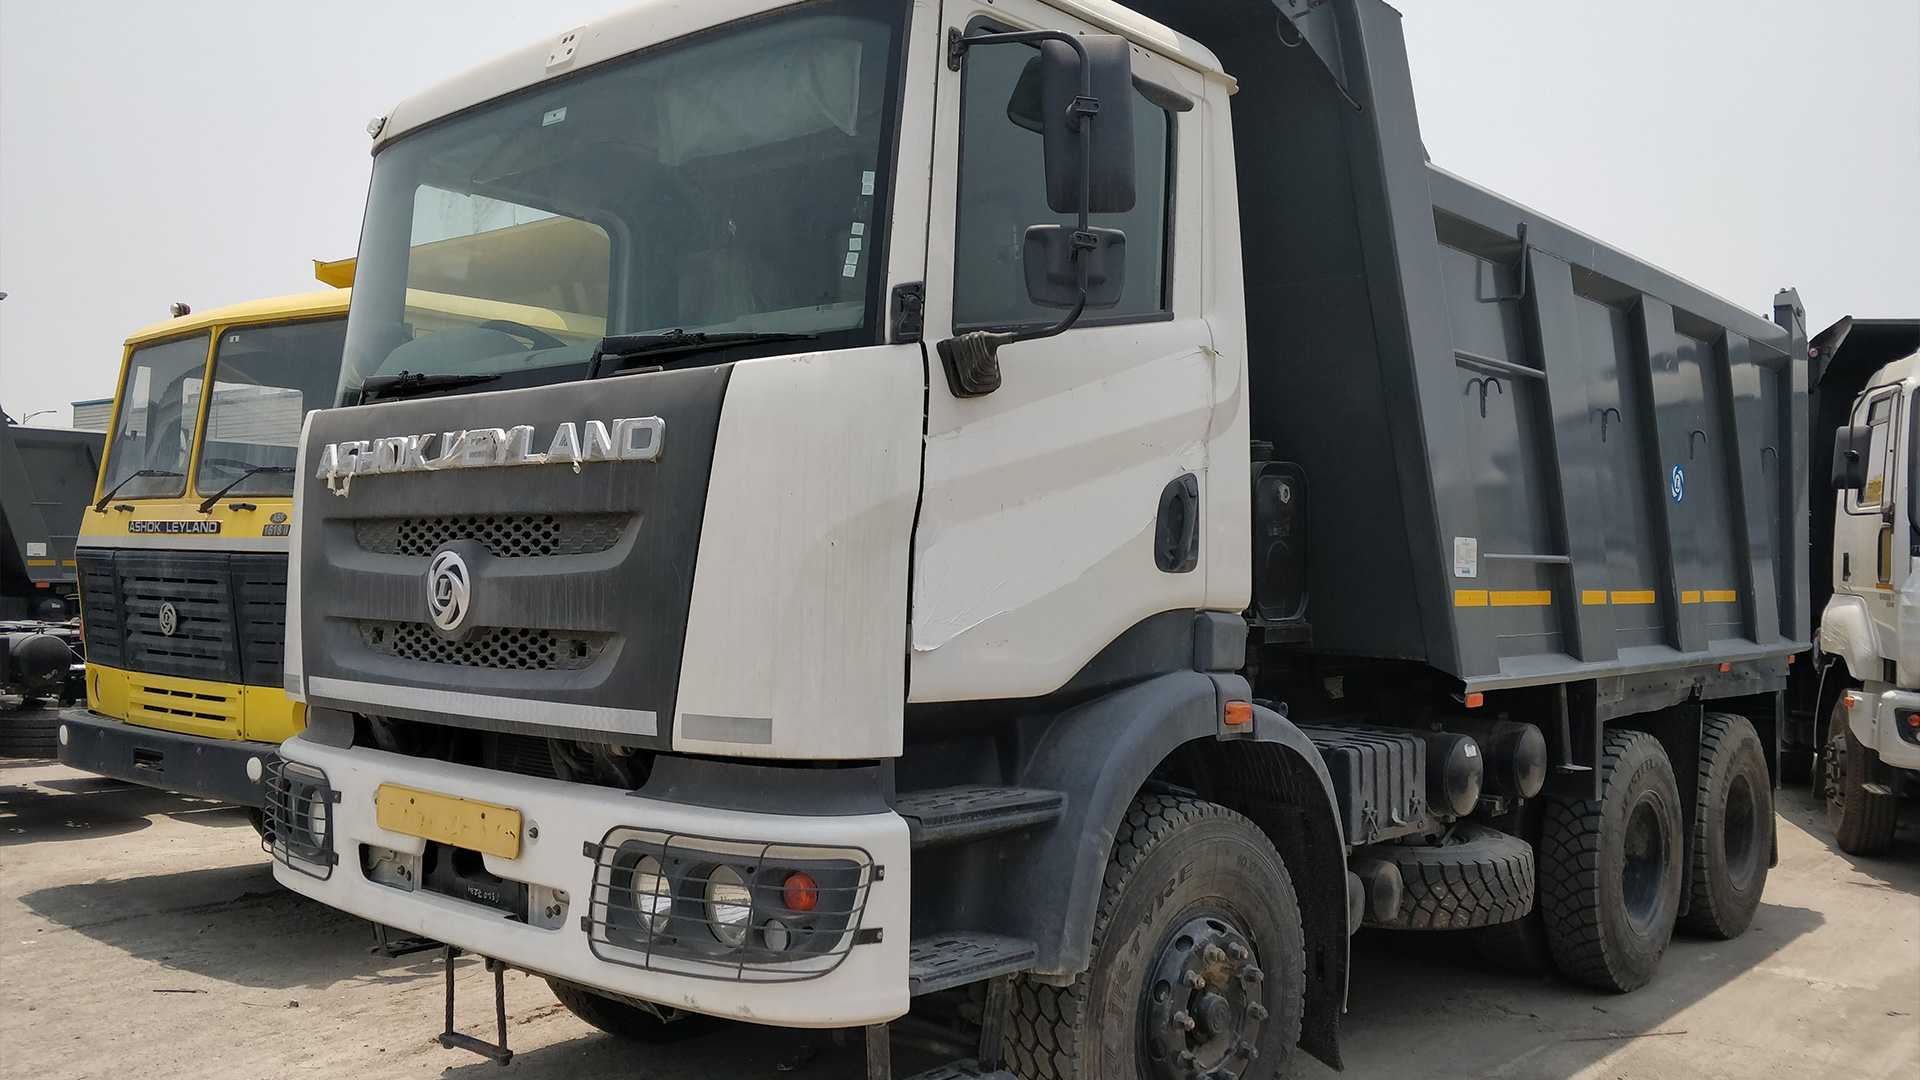 H.P. State Commission Holds Ashok Leyland Dealer Personally Liable For Failure To Return Down Payment